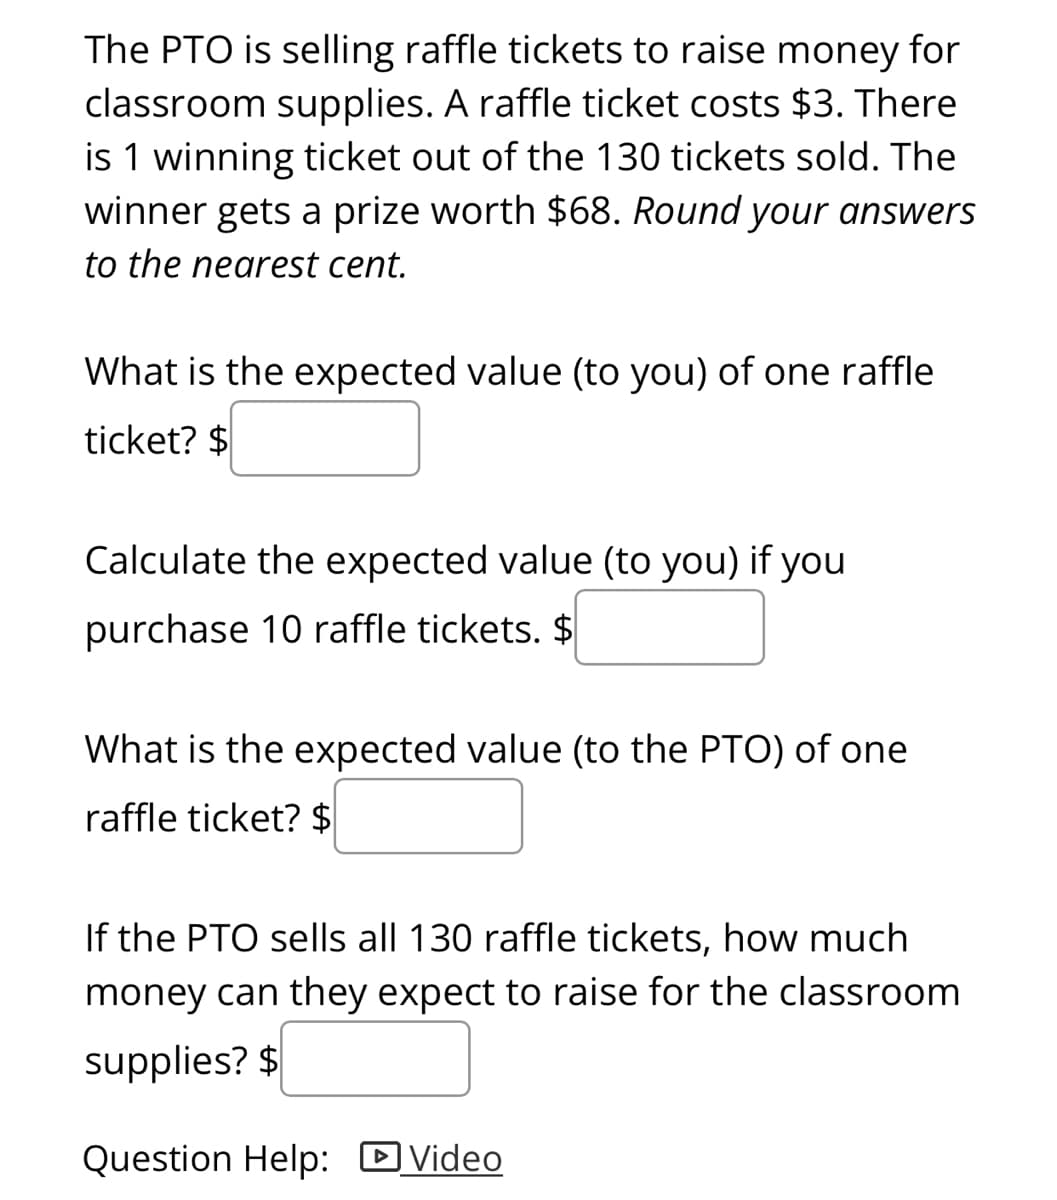 The PTO is selling raffle tickets to raise money for
classroom supplies. A raffle ticket costs $3. There
is 1 winning ticket out of the 130 tickets sold. The
winner gets a prize worth $68. Round your answers
to the nearest cent.
What is the expected value (to you) of one raffle
ticket? $
Calculate the expected value (to you) if you
purchase 10 raffle tickets. $
What is the expected value (to the PTO) of one
raffle ticket? $
If the PTO sells all 130 raffle tickets, how much
money can they expect to raise for the classroom
supplies? $
Question Help: DVideo
